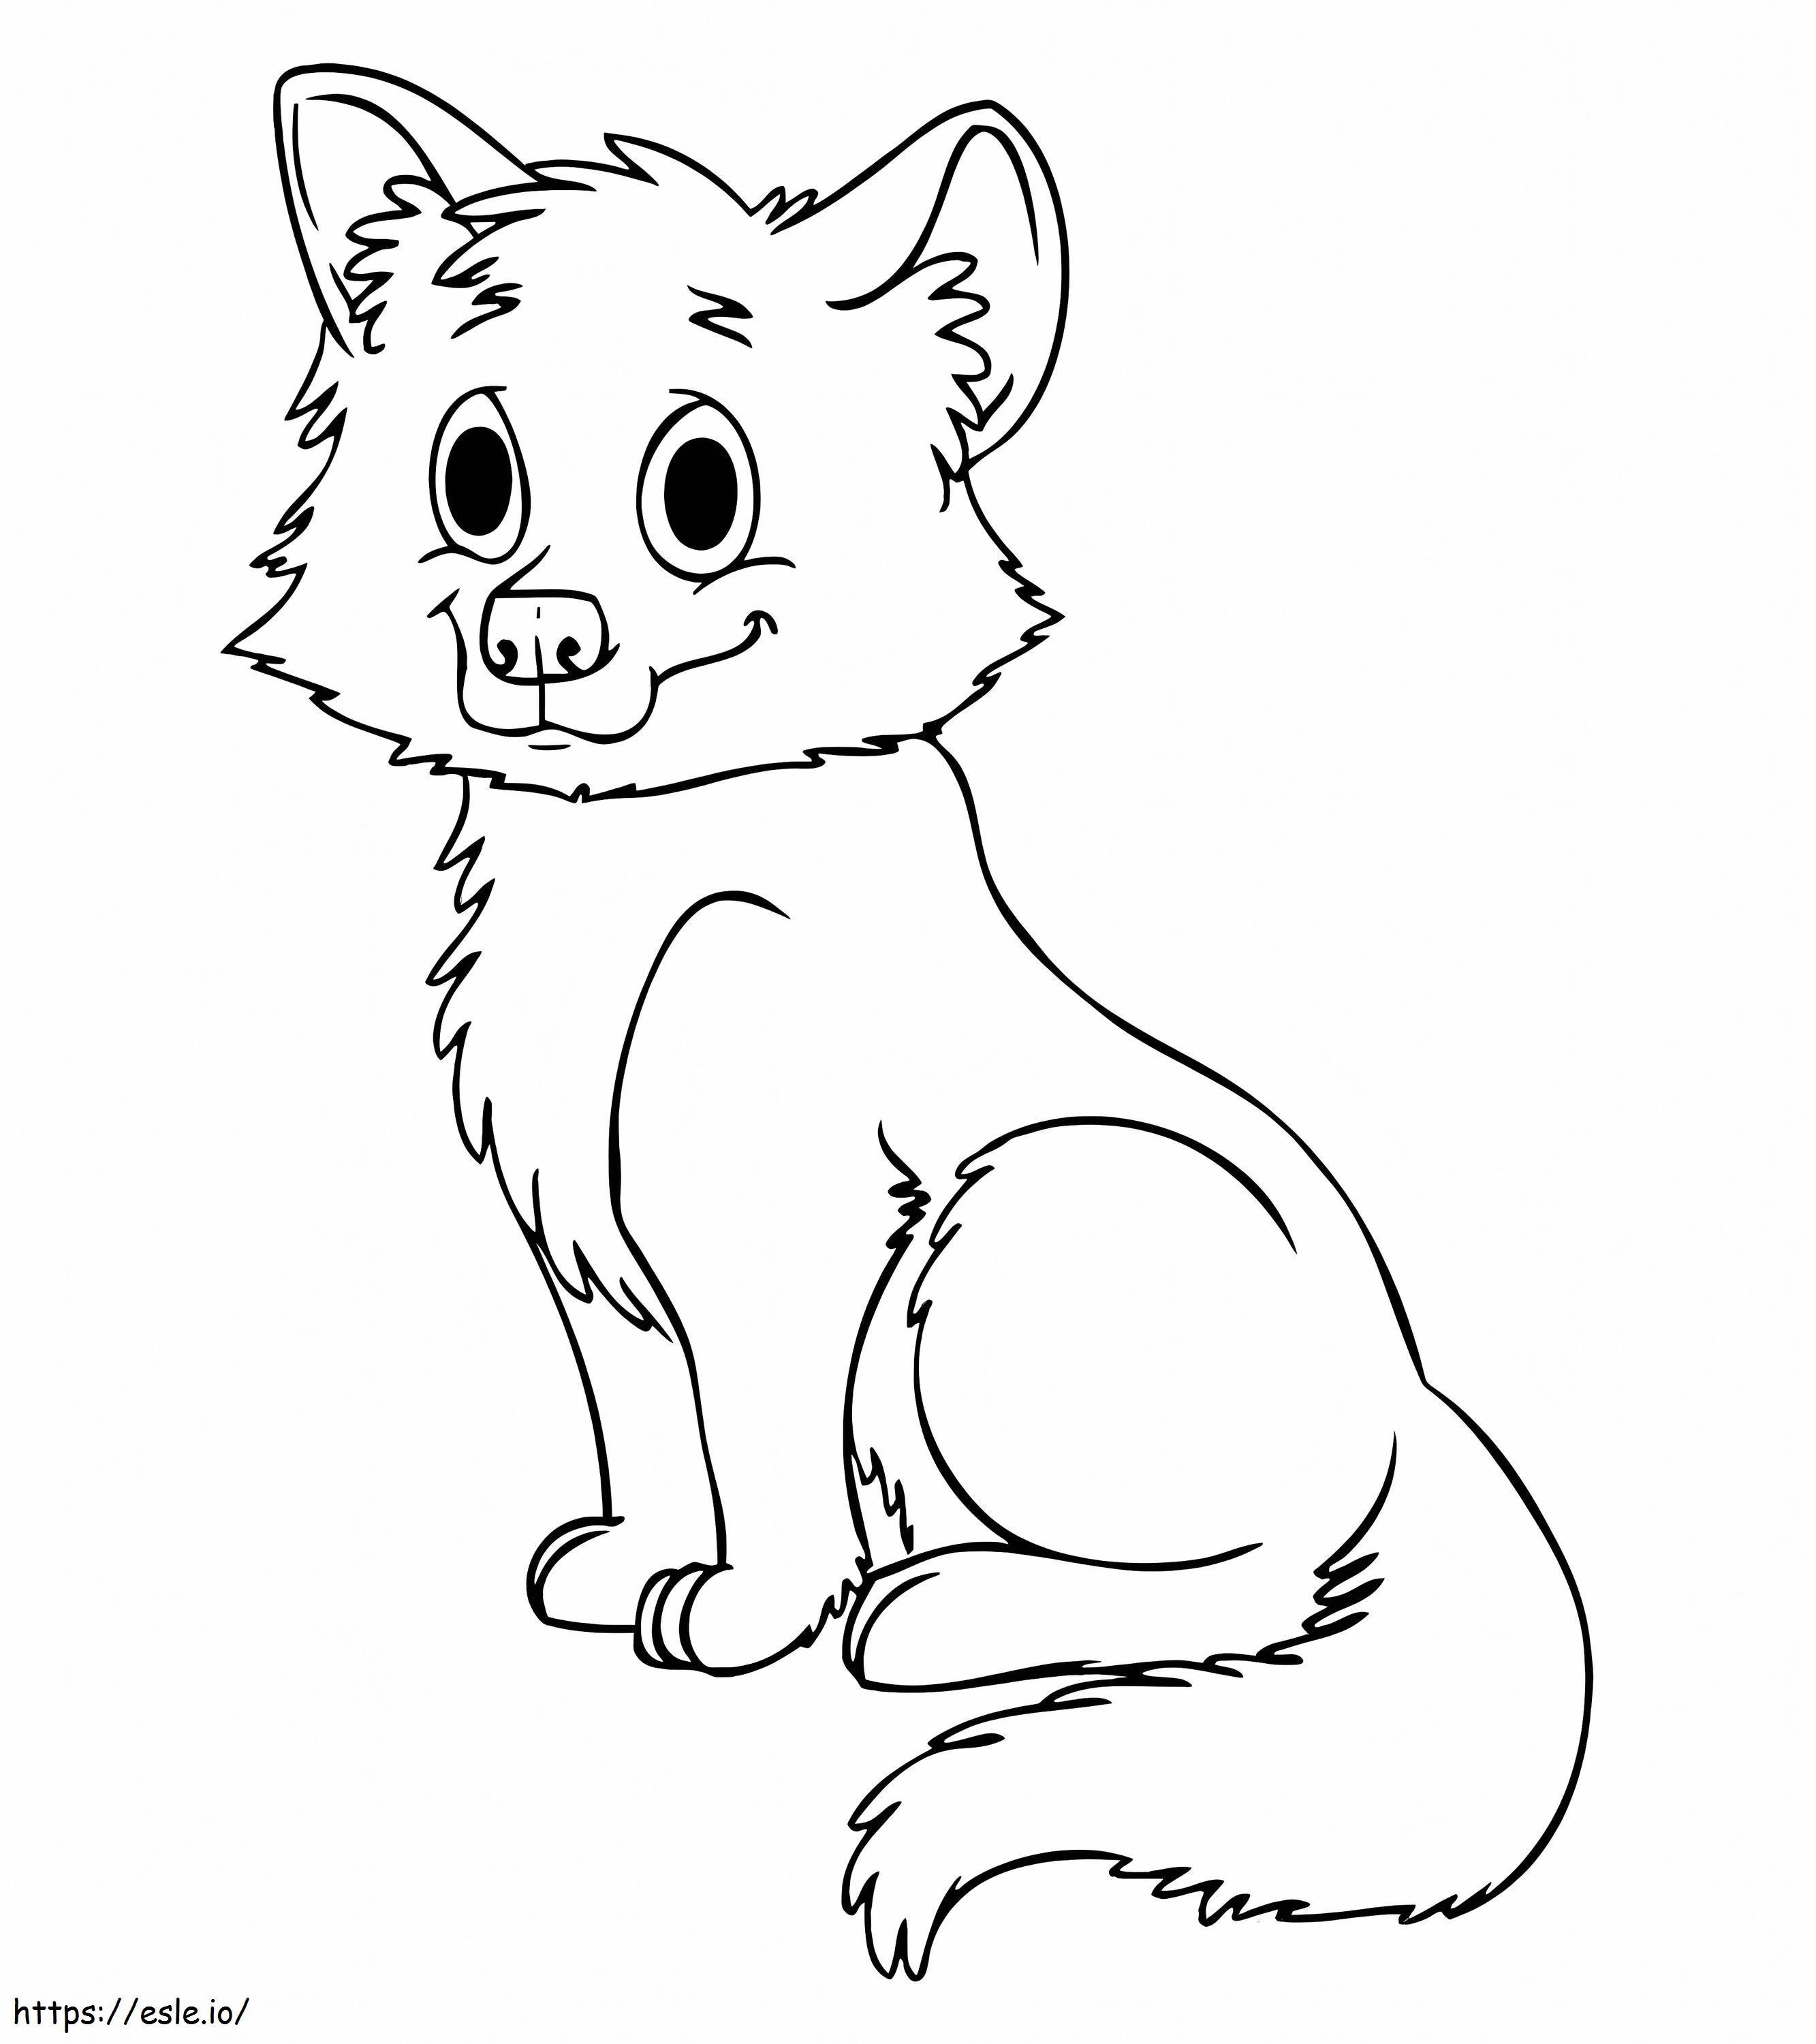 Little Smiling Wolf coloring page